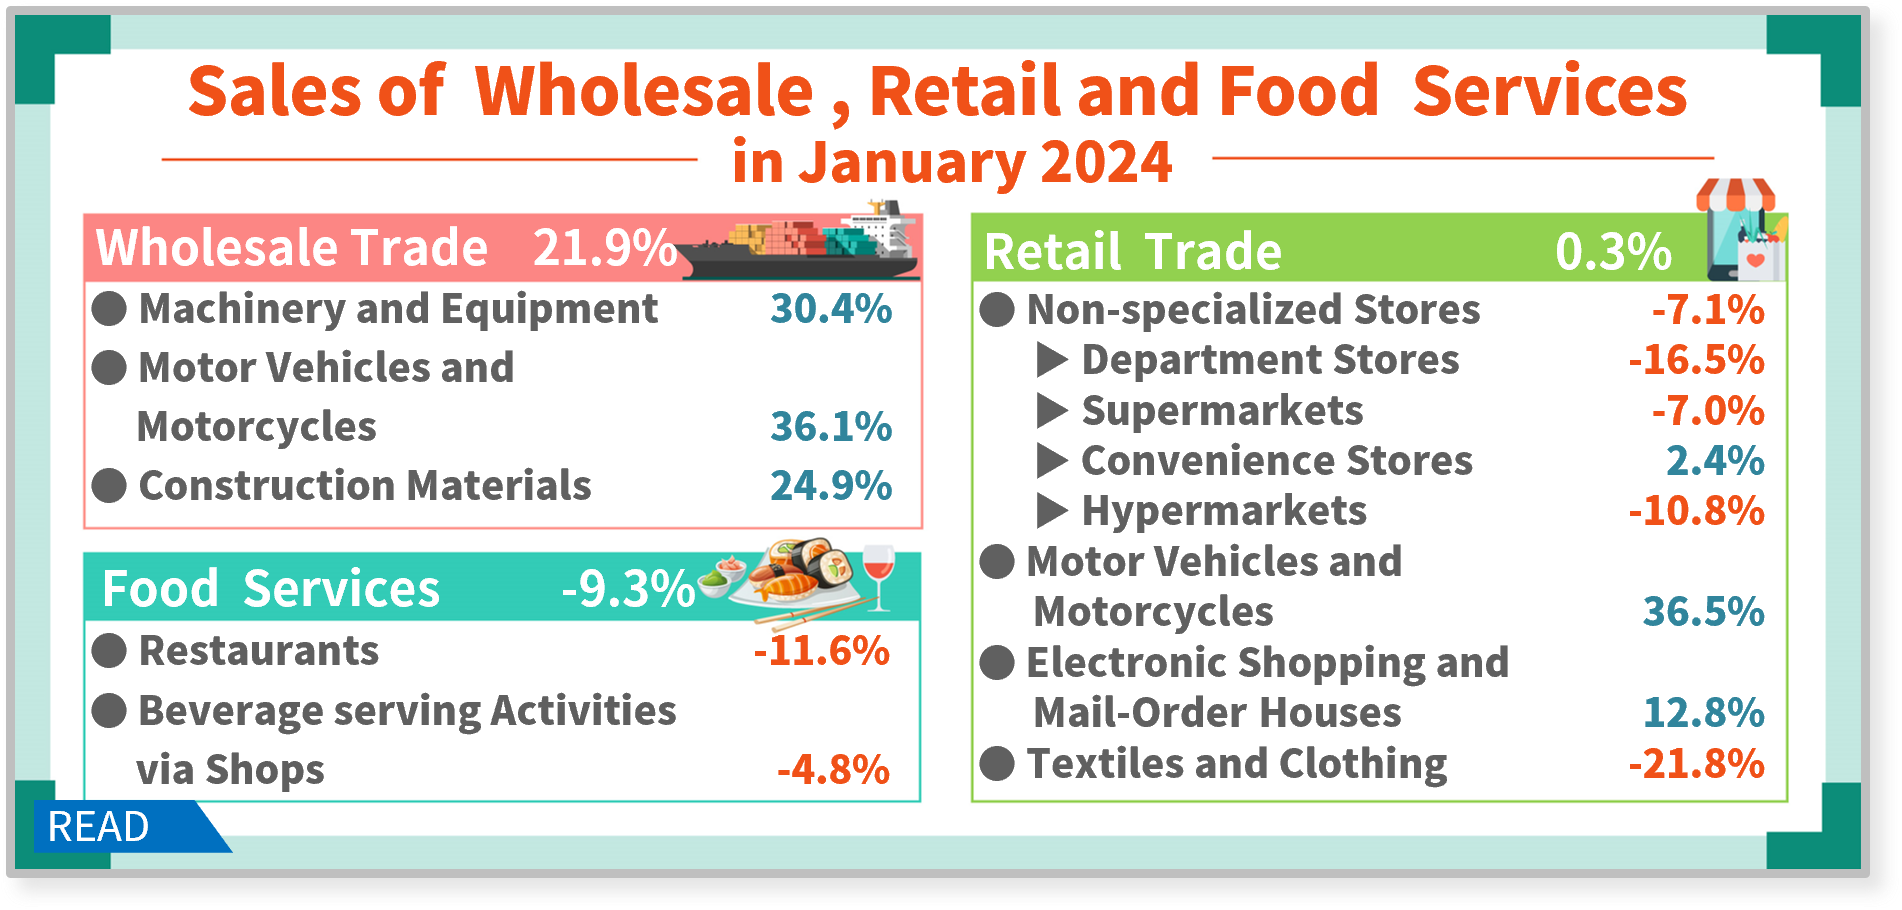 Sales of Wholesale, Retail and Food Services in January 2024